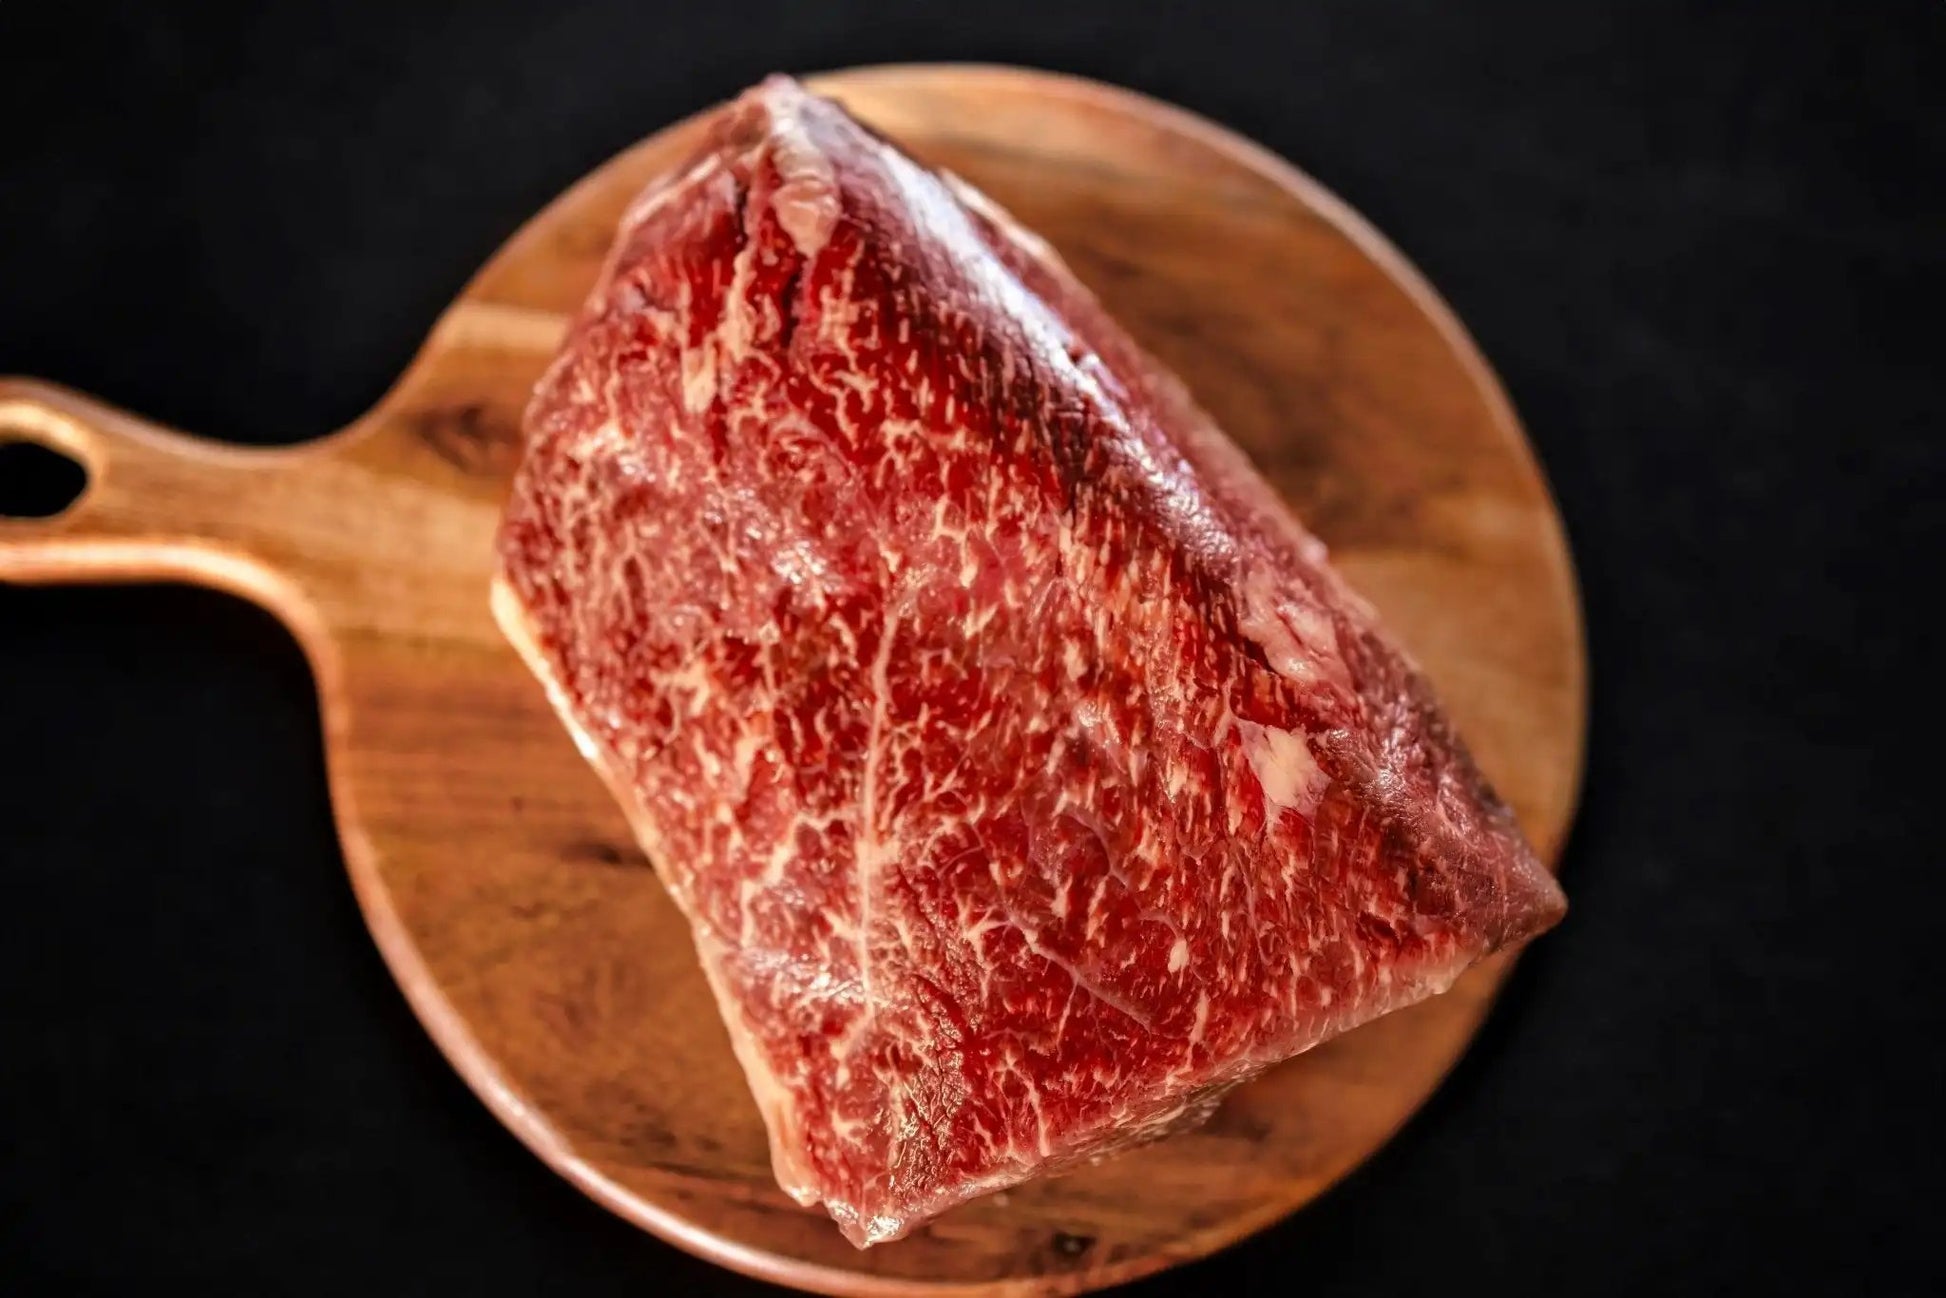 Grass-Fed Pasture-Raised Wagyu or Angus 1/2 Beef Box - 200lbs of BeefThe Grass-fed 1/2 Beef Box is the ultimate indulgence for beef lovers seeking the finest quality and flavor. This premium box contains a generous selection of Wagyu Grass-Fed Pasture-Raised WagyuThe Hufeisen-Ranch (WYO Wagyu)